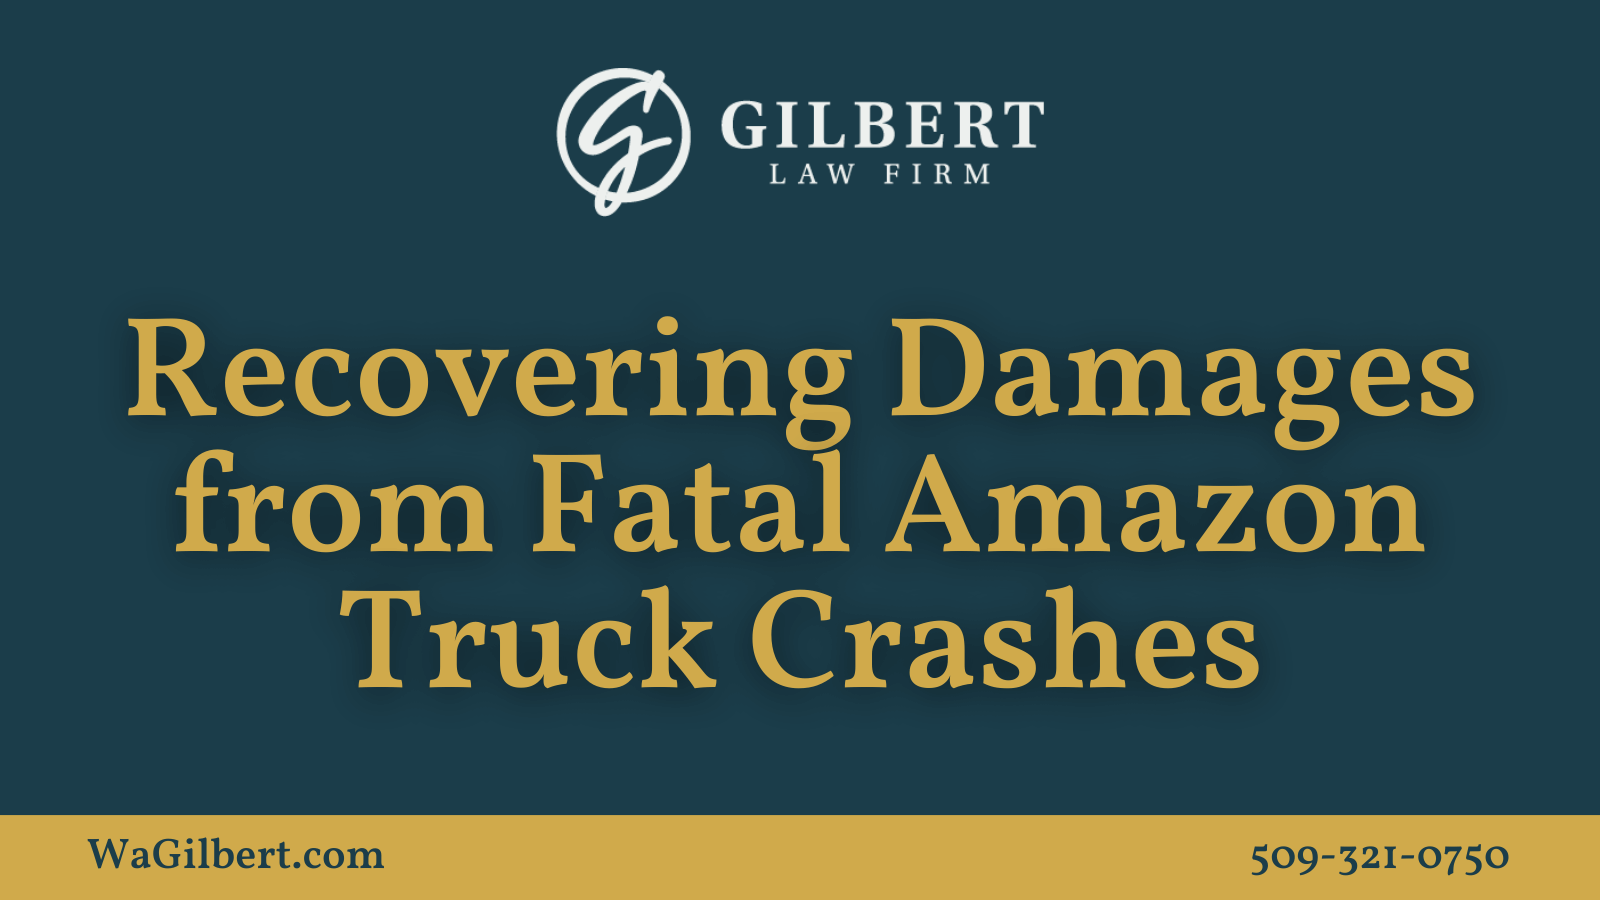 Recovering Damages from Fatal Amazon Truck Crashes